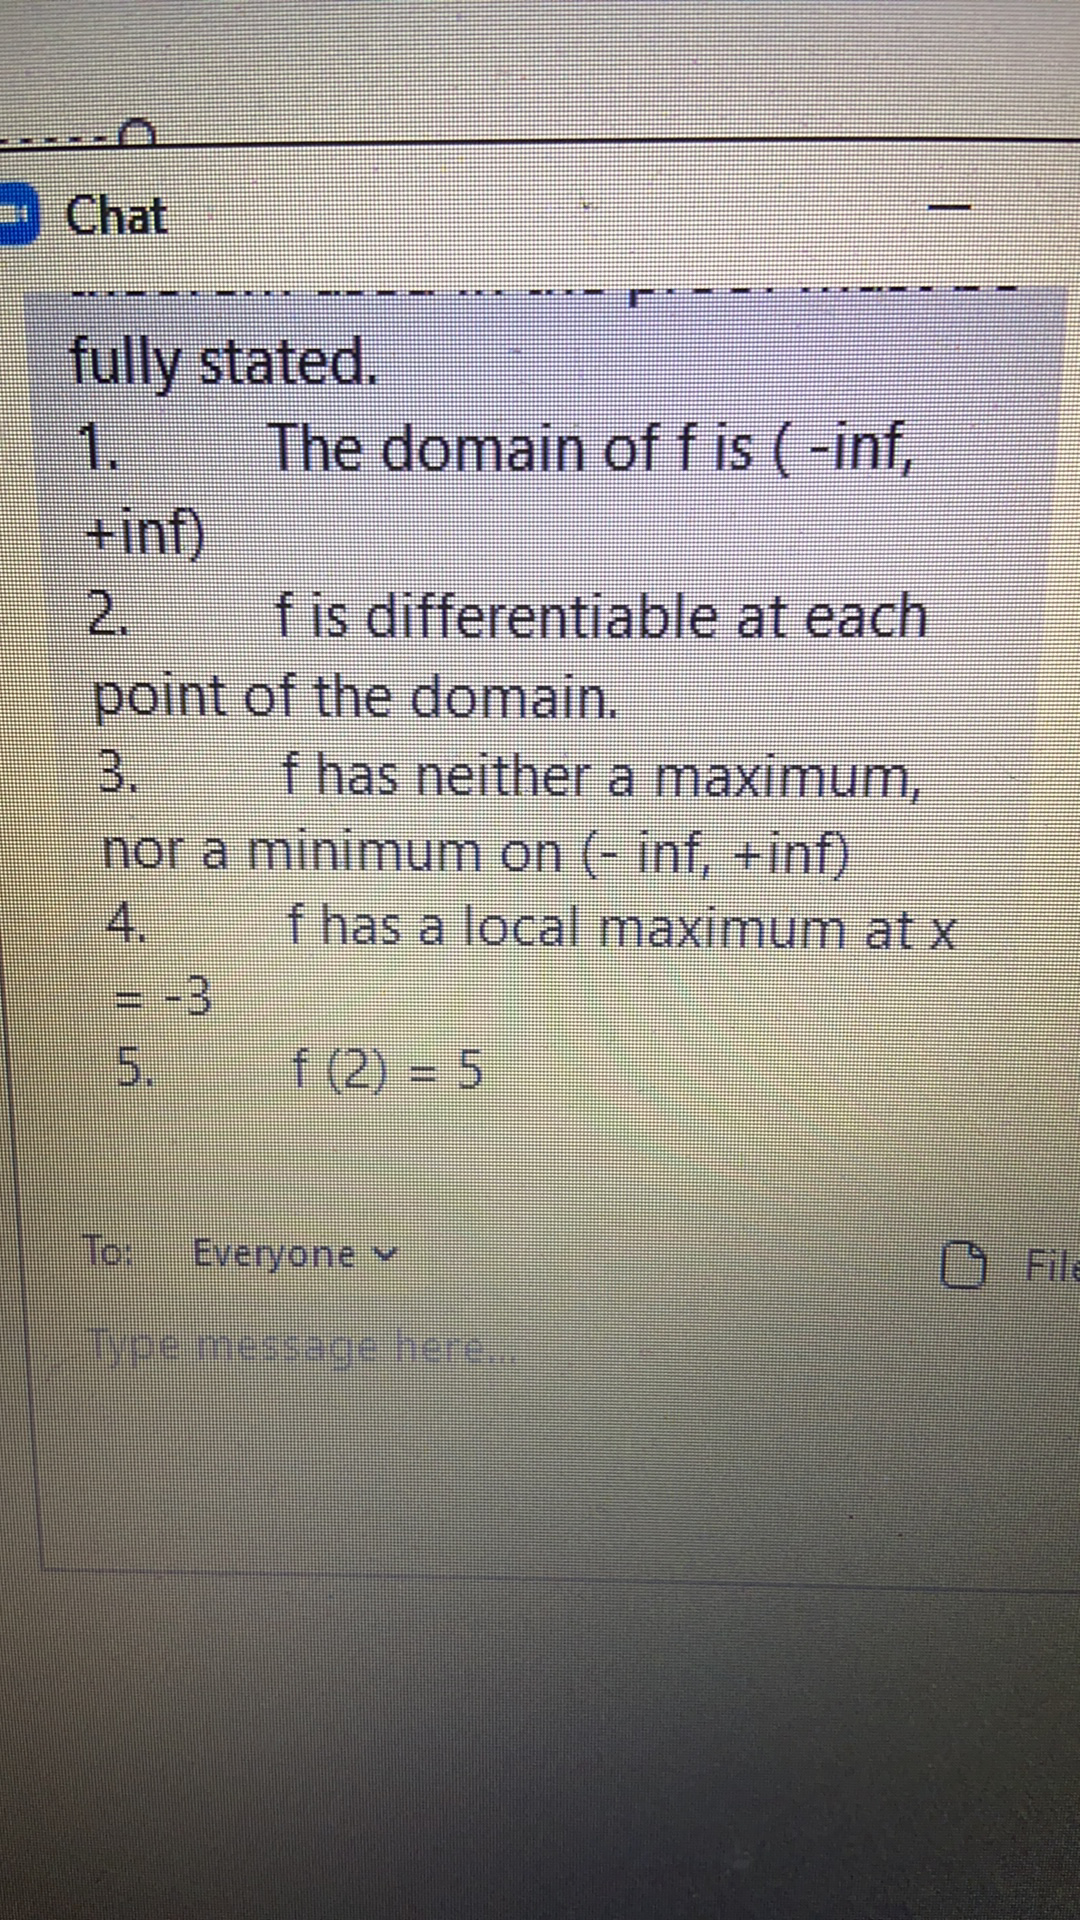 Chat
fully stated.
1.
The domain of f is (-inf,
+inf)
2.
point of the domain.
3.
nor a minimum on (- inf, +inf)
4.
f is differentiable at each
f has neither a maximum,
f has a local maximum at x
= -3
5.
f (2) = 5
Tor Everyone Y
File
Type.message here.
